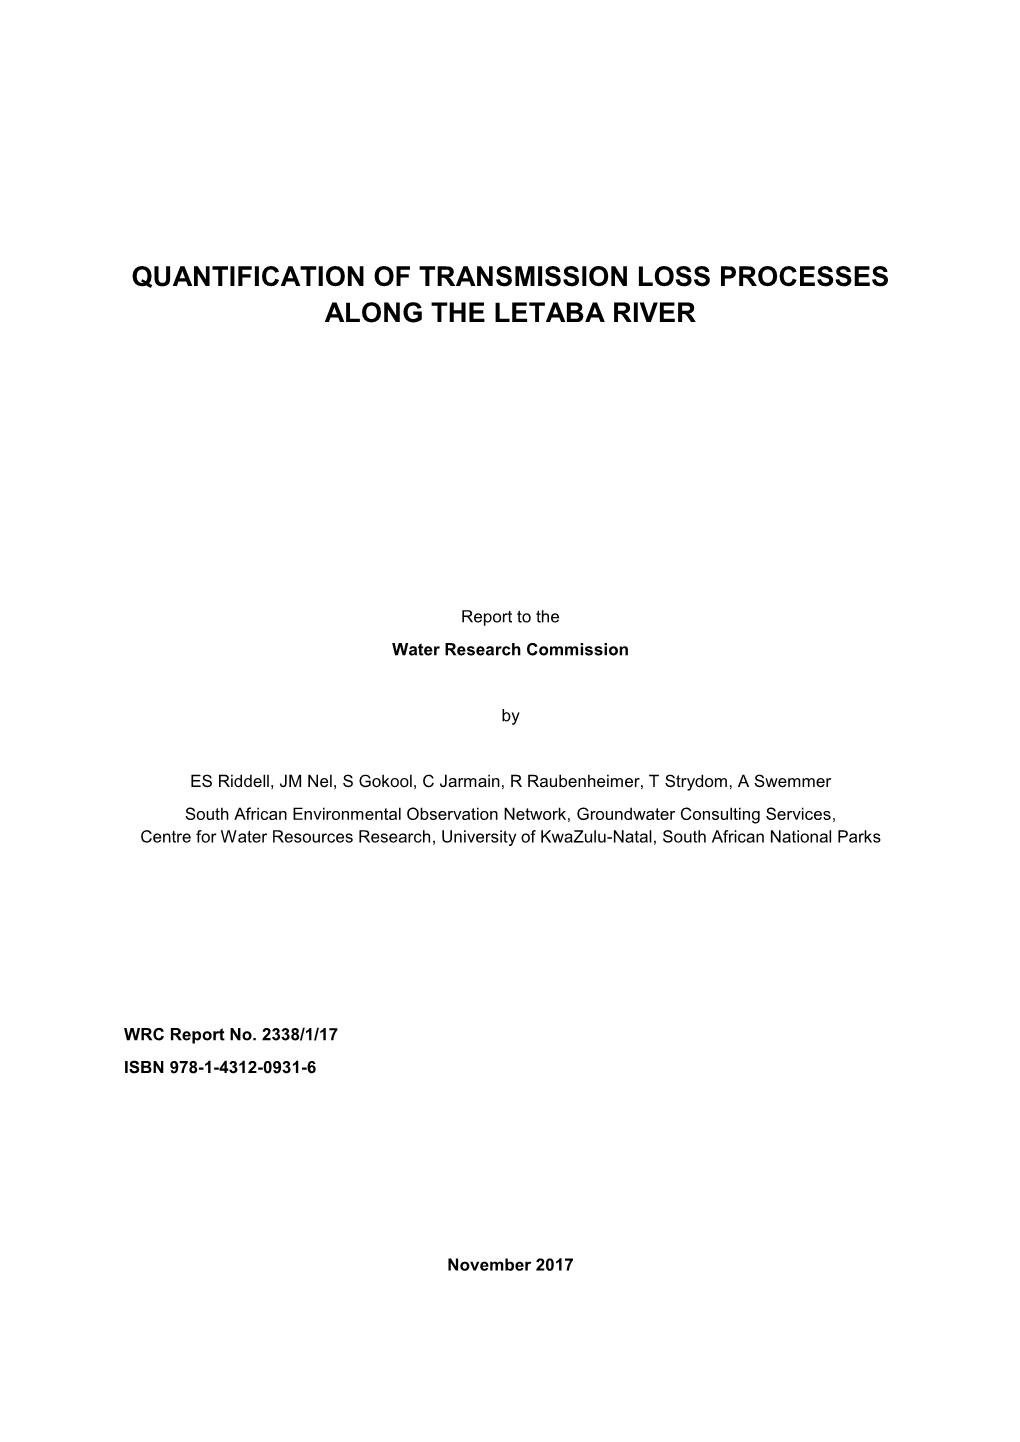 Quantification of Transmission Loss Processes Along the Letaba River